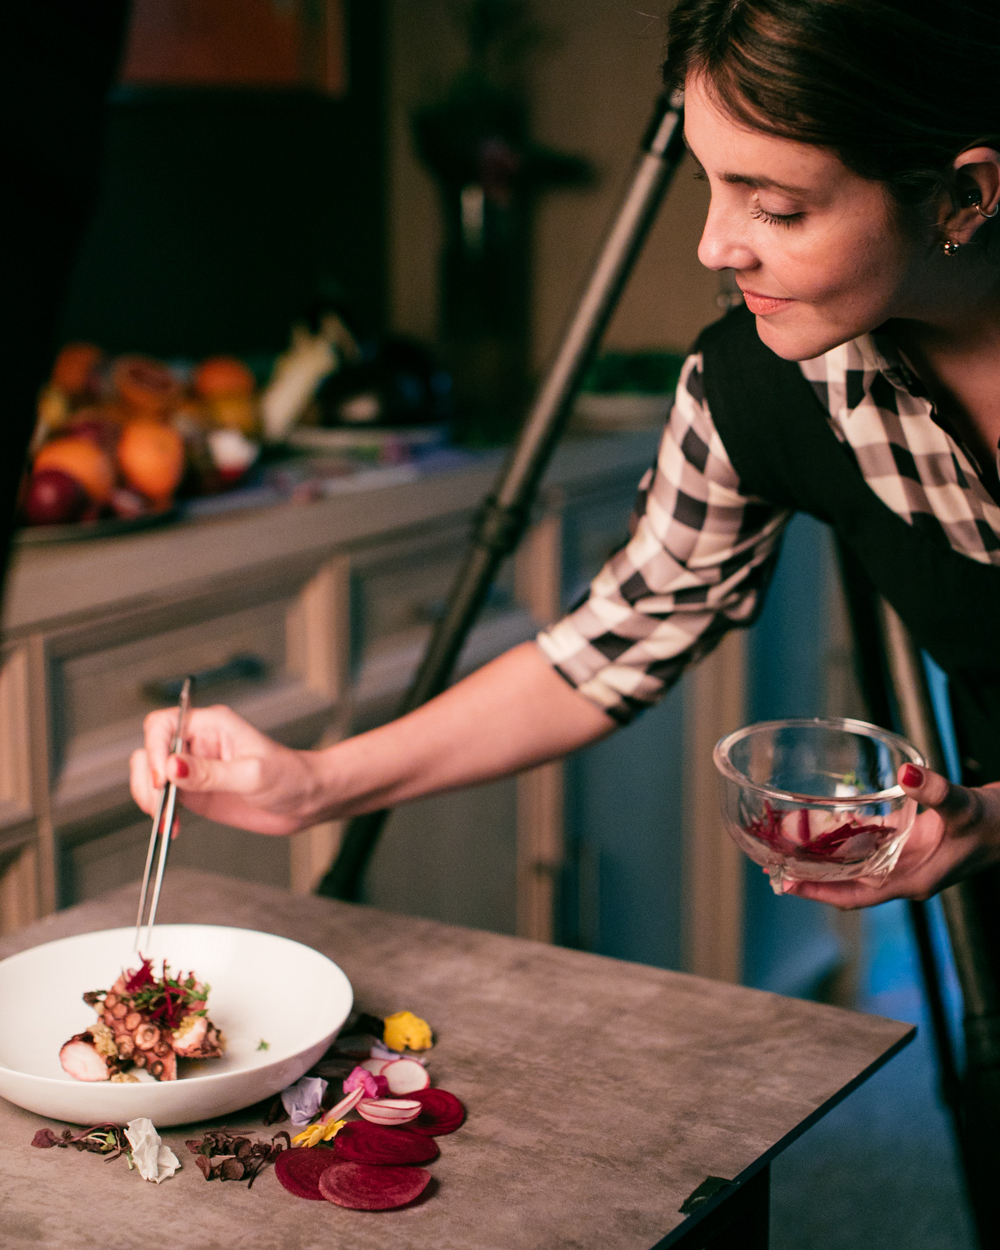 Food Styling workshop by Mariana Velasquez | hosted by  St. Regis Macao